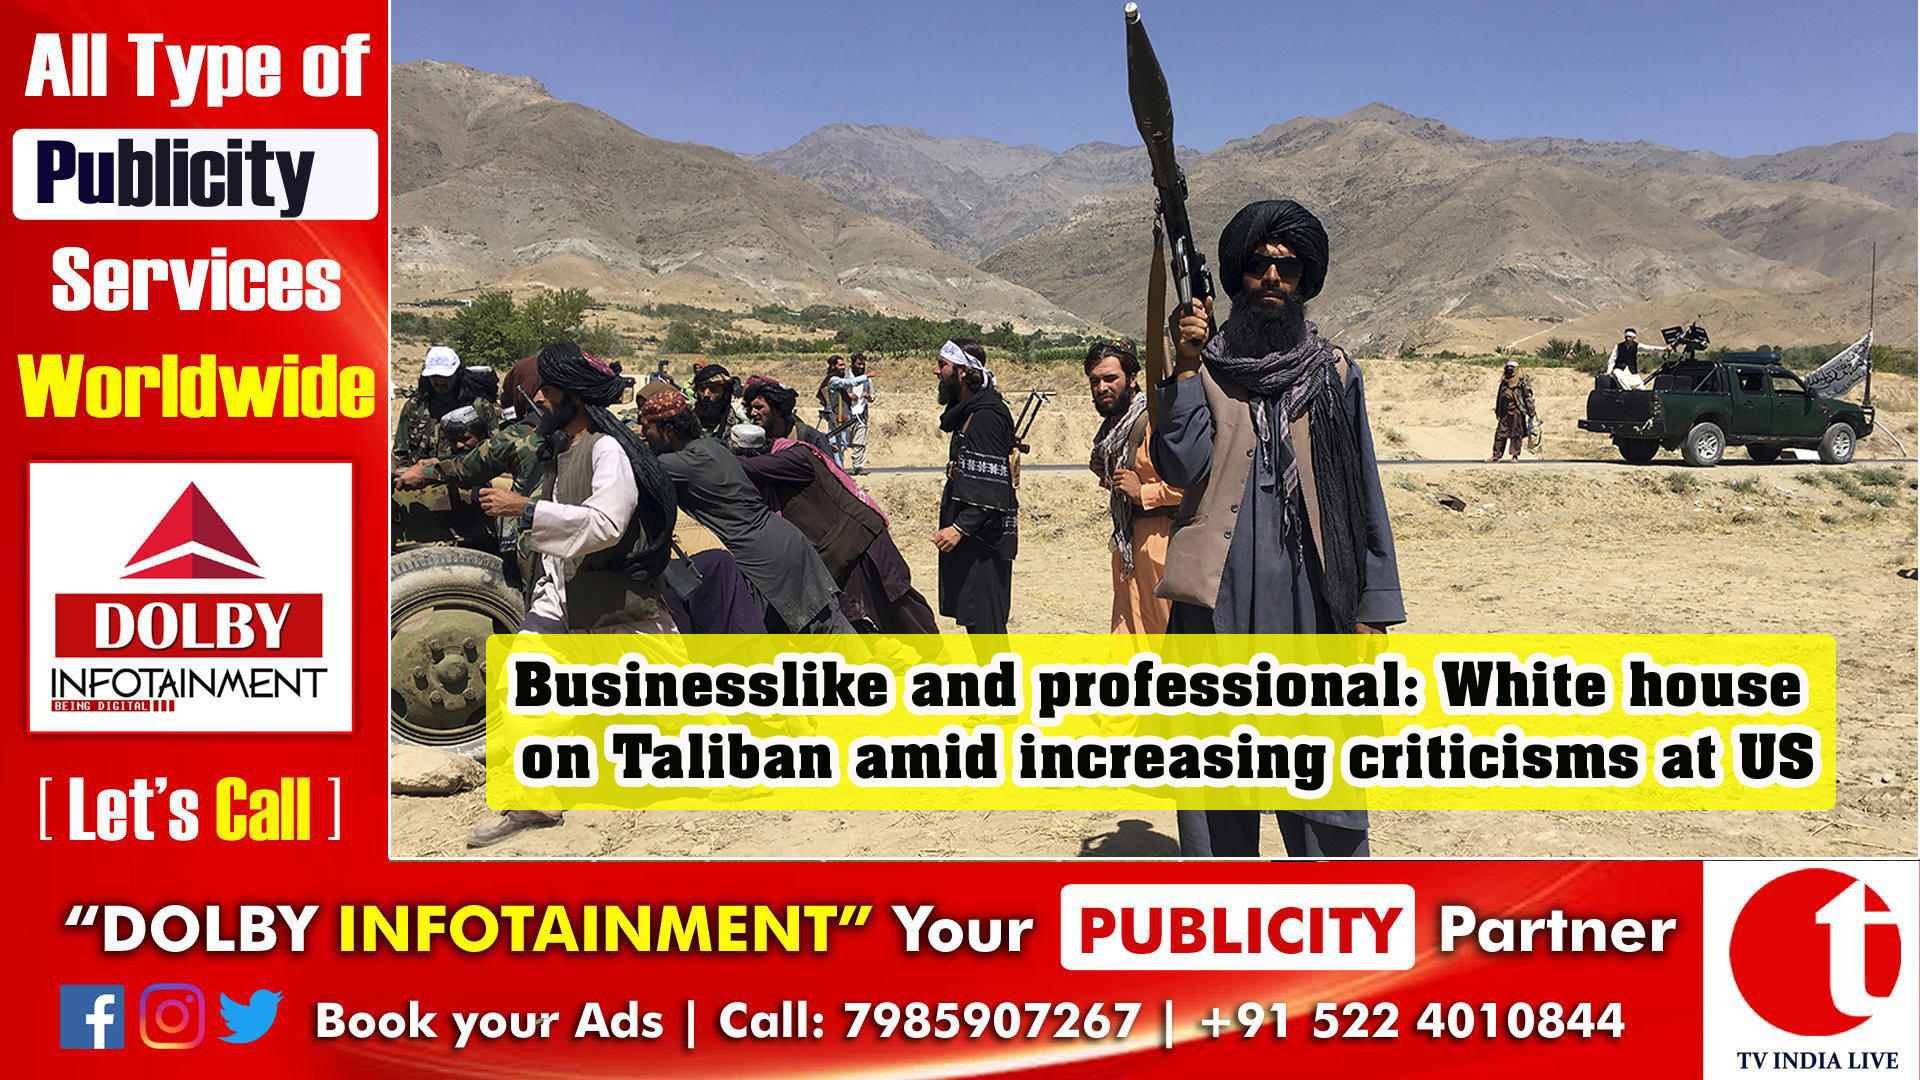 Businesslike and professional: White house on Taliban amid increasing criticisms at US